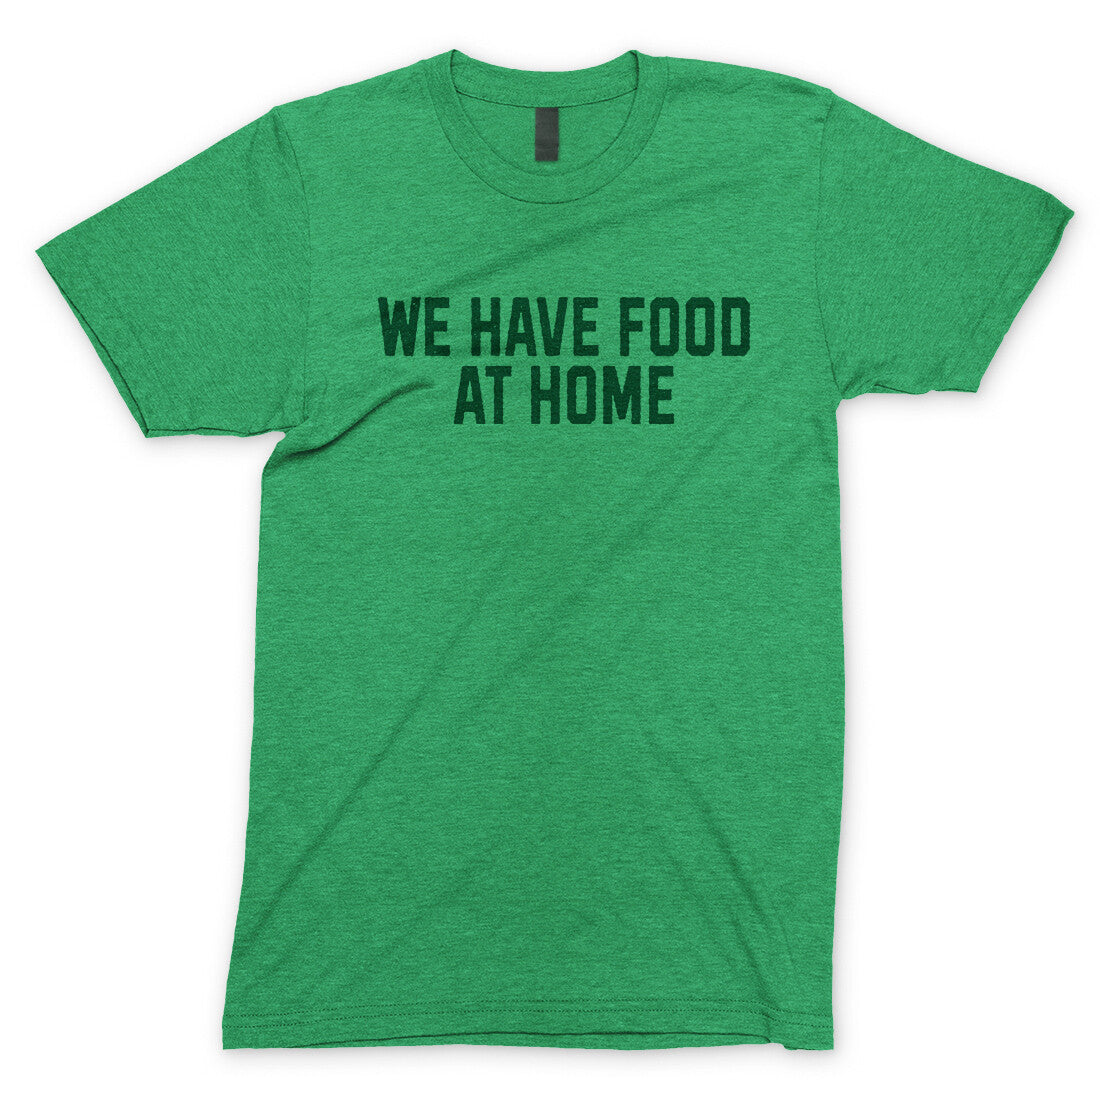 We Have Food at Home in Heather Irish Green Color